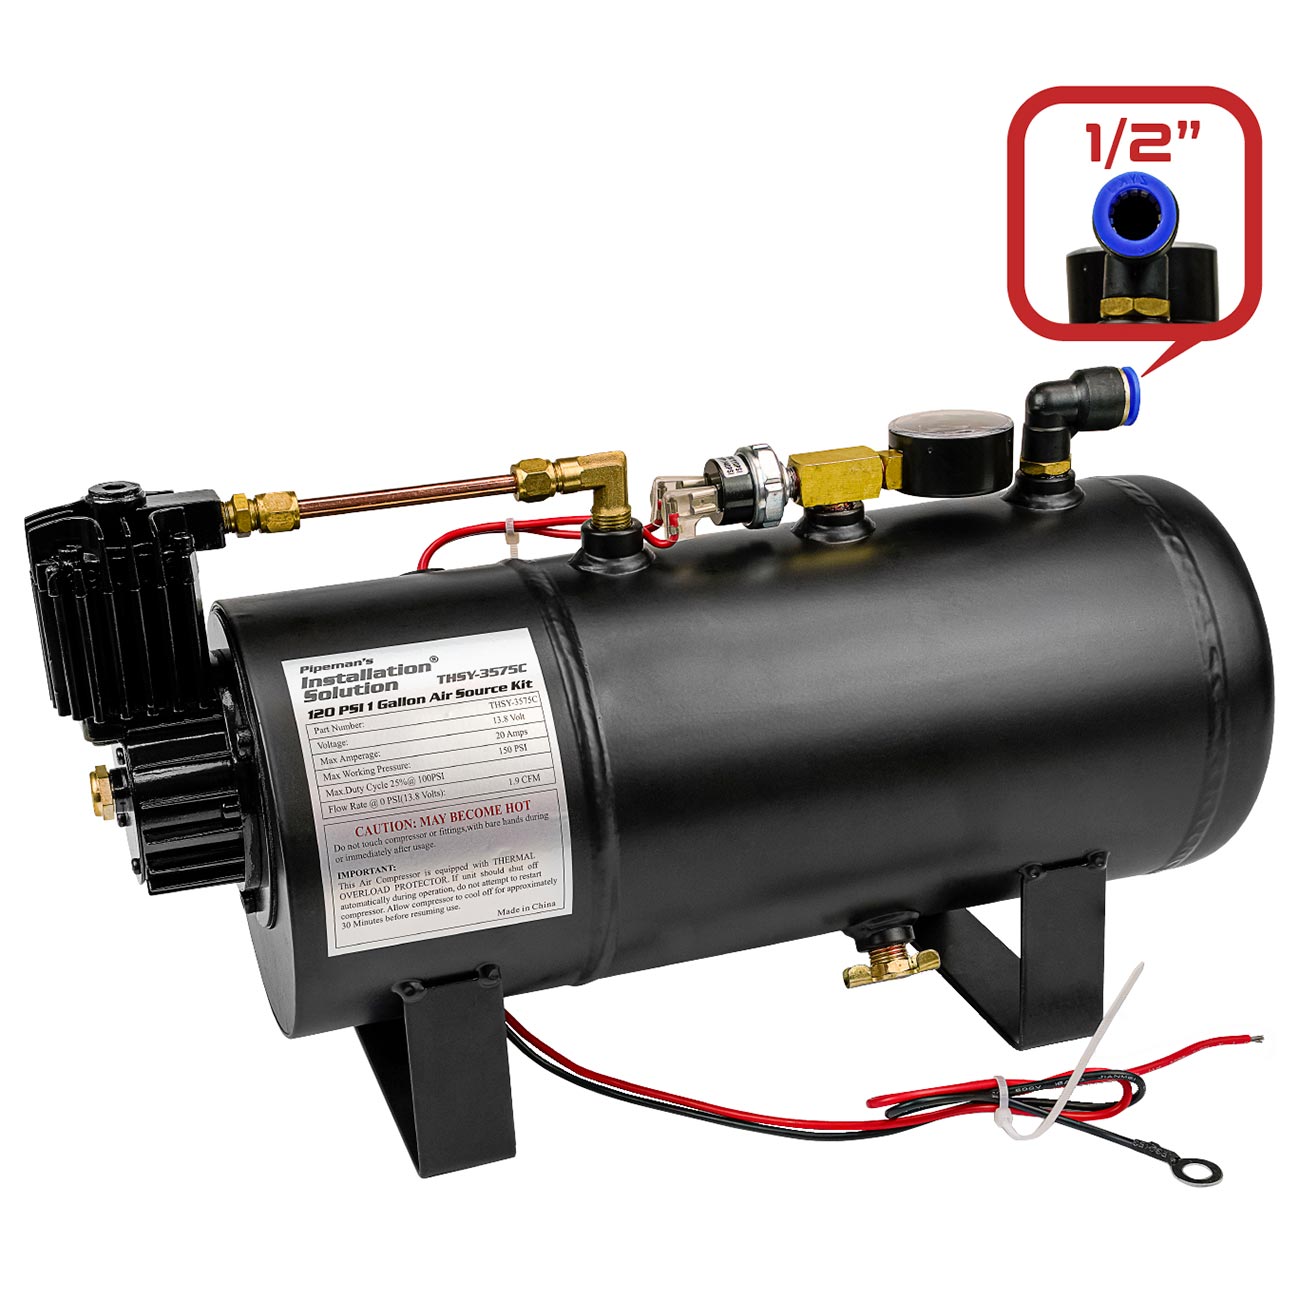 Installation Solutions 120 PSI 1 Gallon Air Source Kit